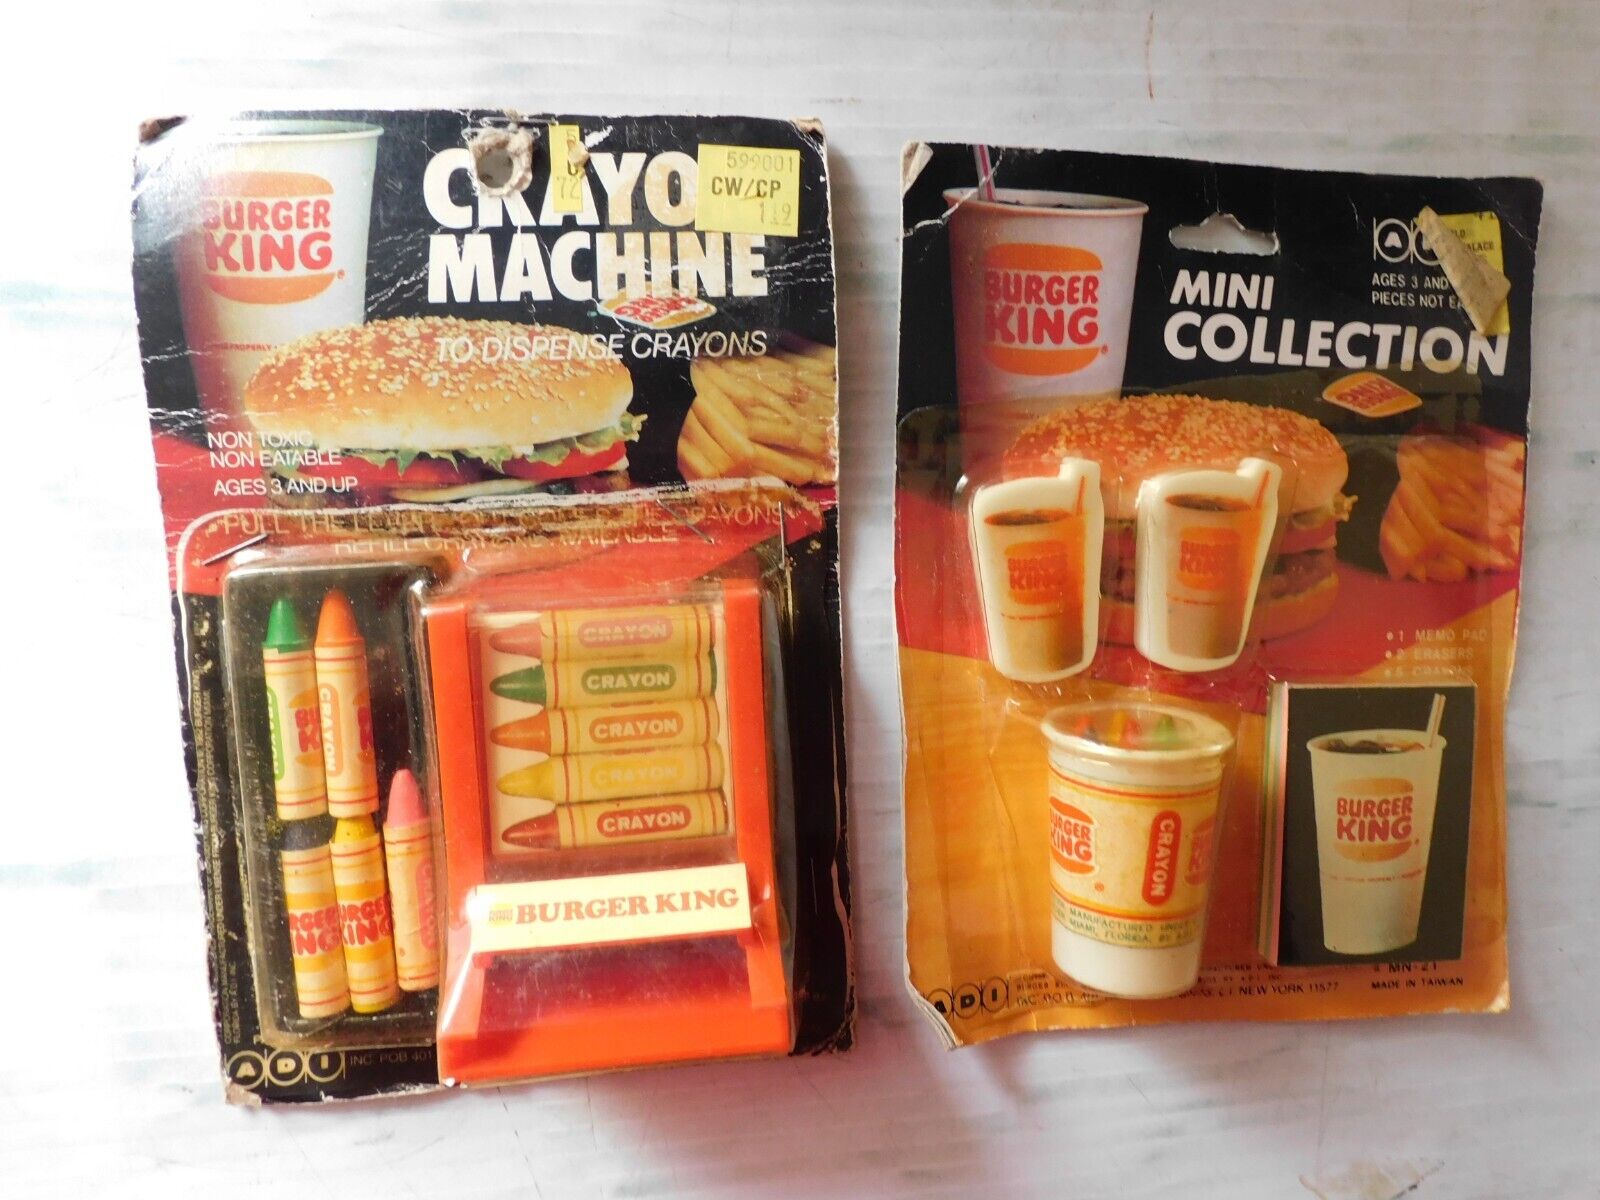 1982 Burger King advertising Crayon Machine + Mini Collection in packages